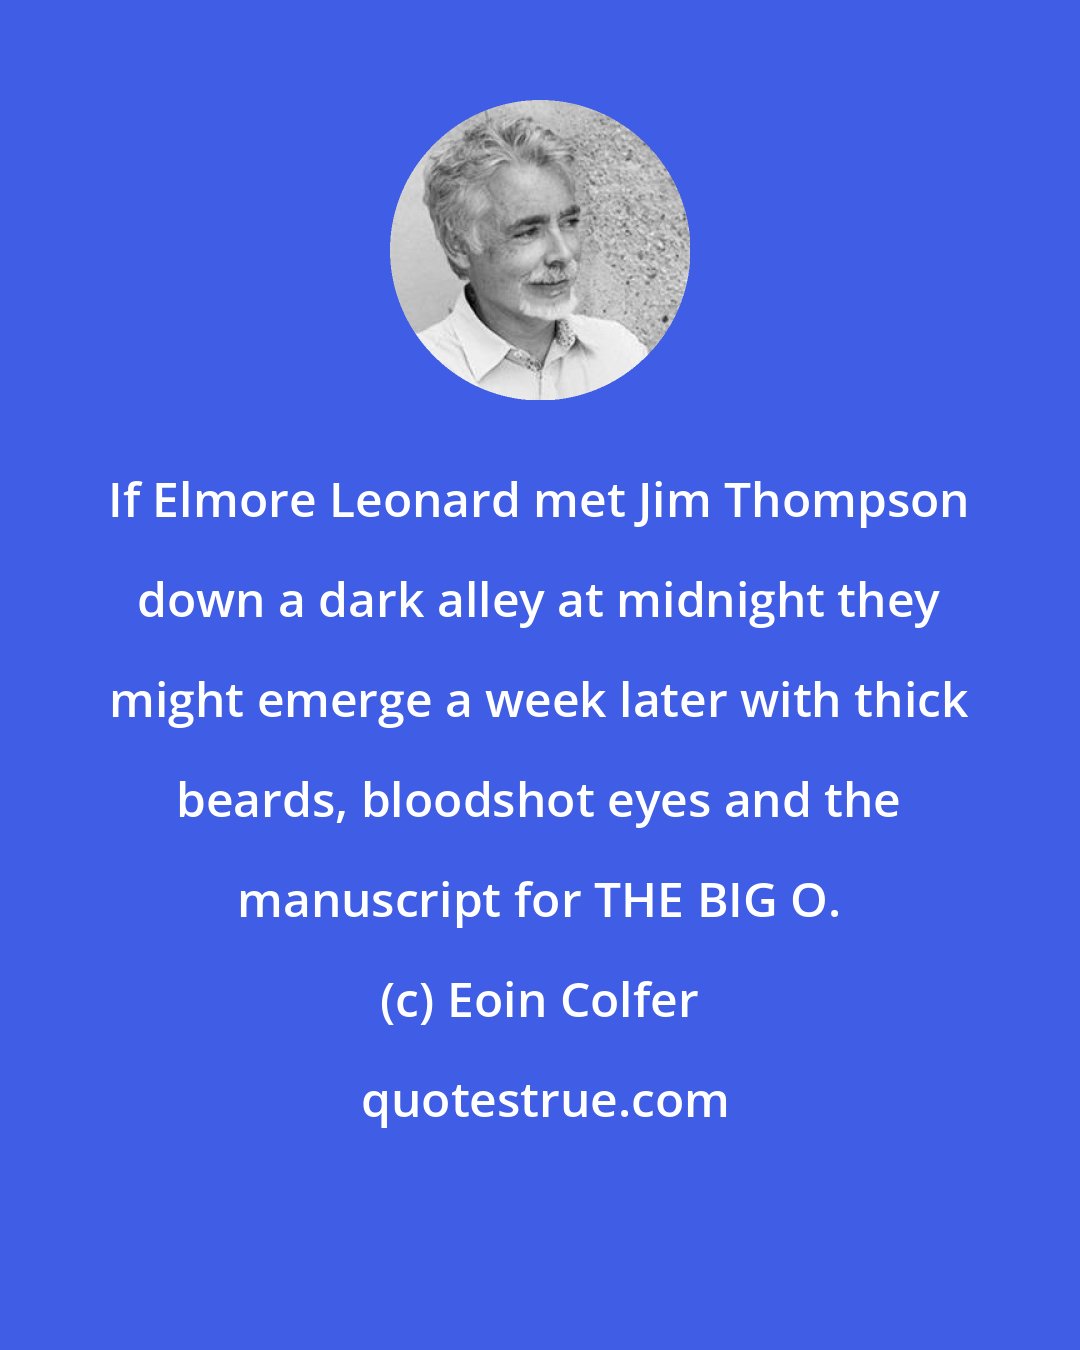 Eoin Colfer: If Elmore Leonard met Jim Thompson down a dark alley at midnight they might emerge a week later with thick beards, bloodshot eyes and the manuscript for THE BIG O.